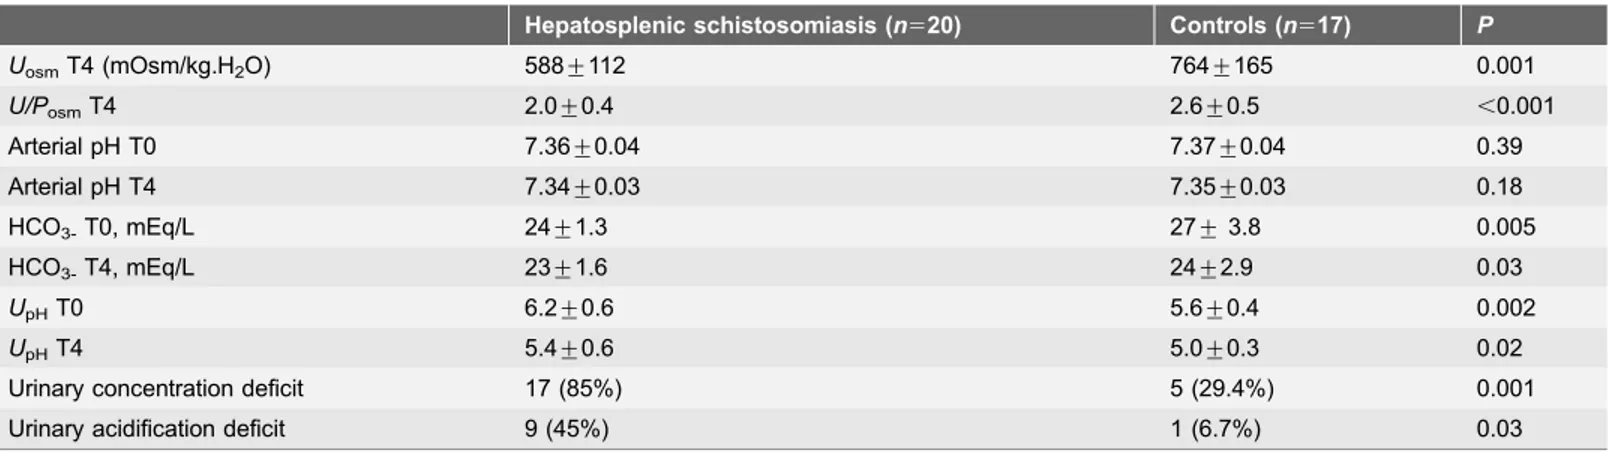 Table 3. Comparison of urinary concentration and acidification tests in hepatosplenic schistosomiasis patients and controls.